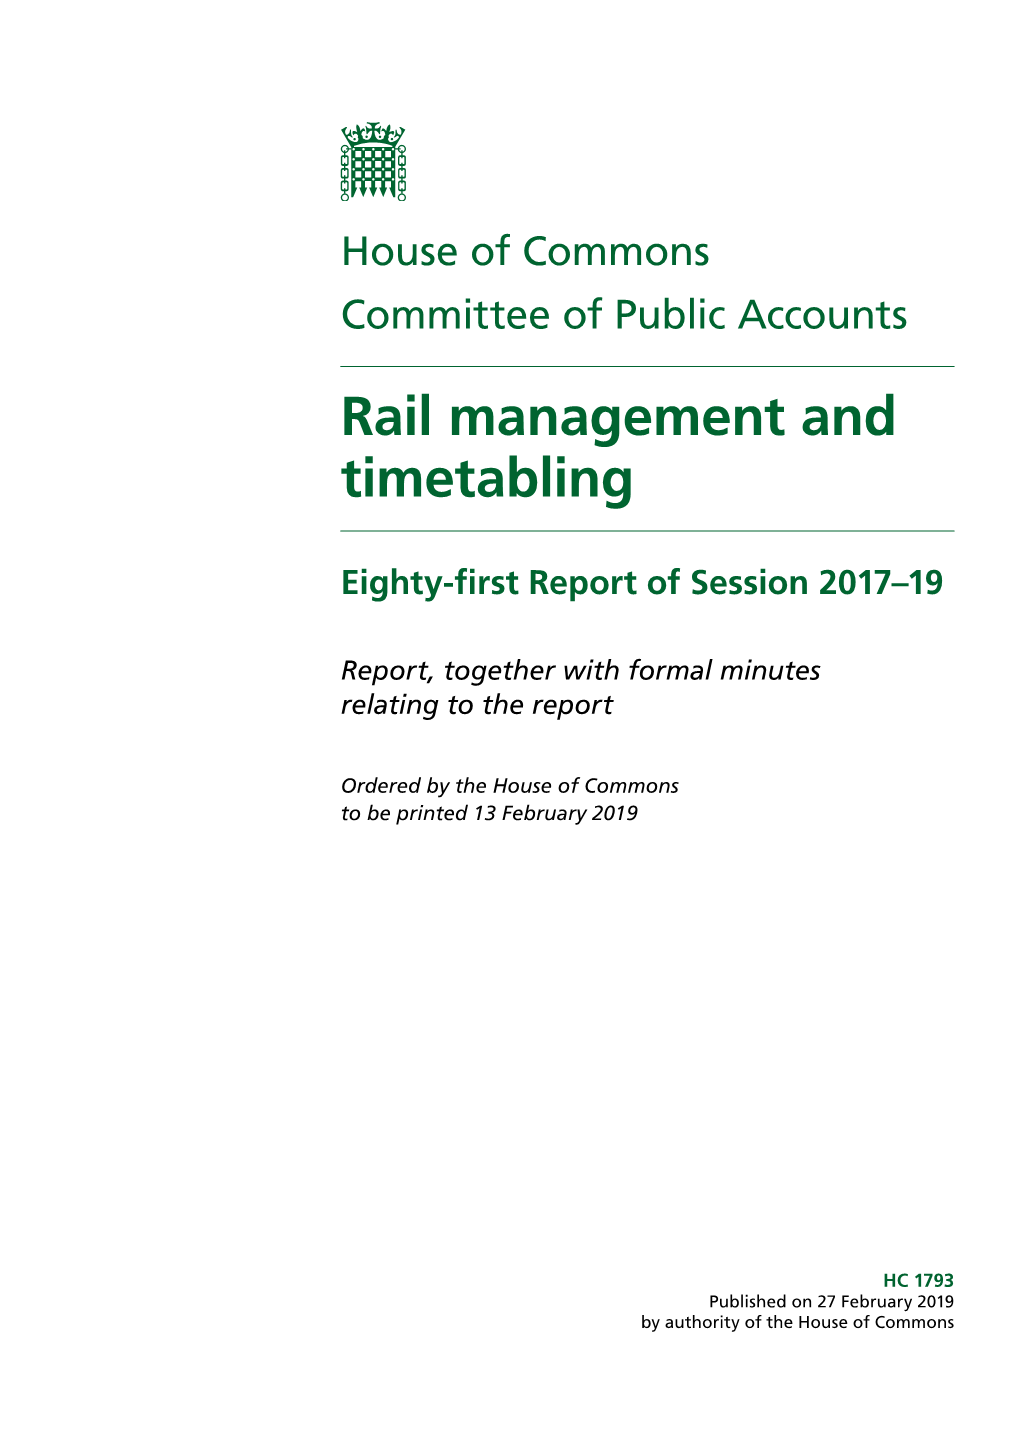 Rail Franchising, Crossrail and the Department’S Handling of Other Rail Programmes in the UK